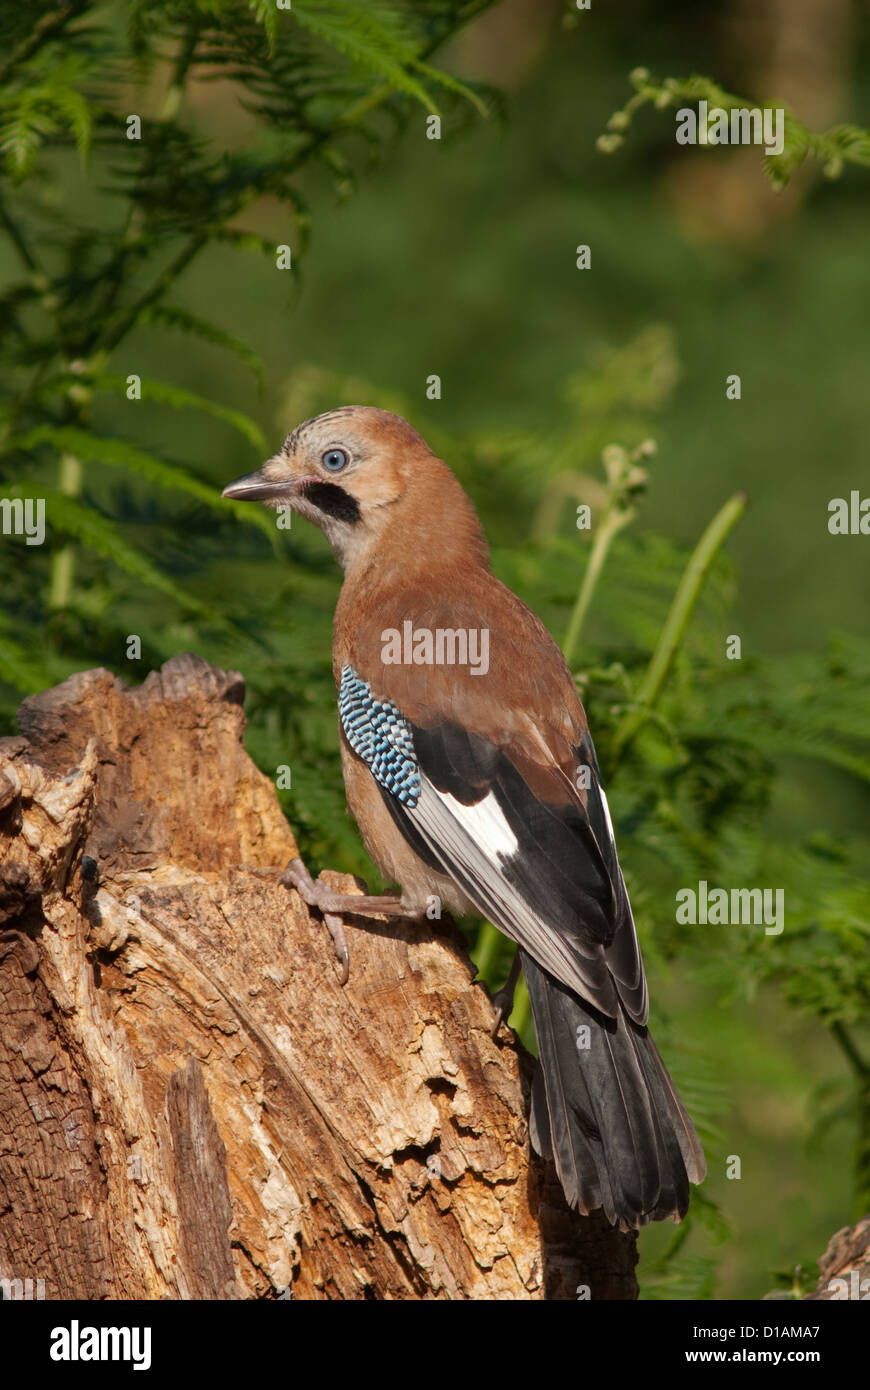 Juvenile Jay perched on log Stock Photo